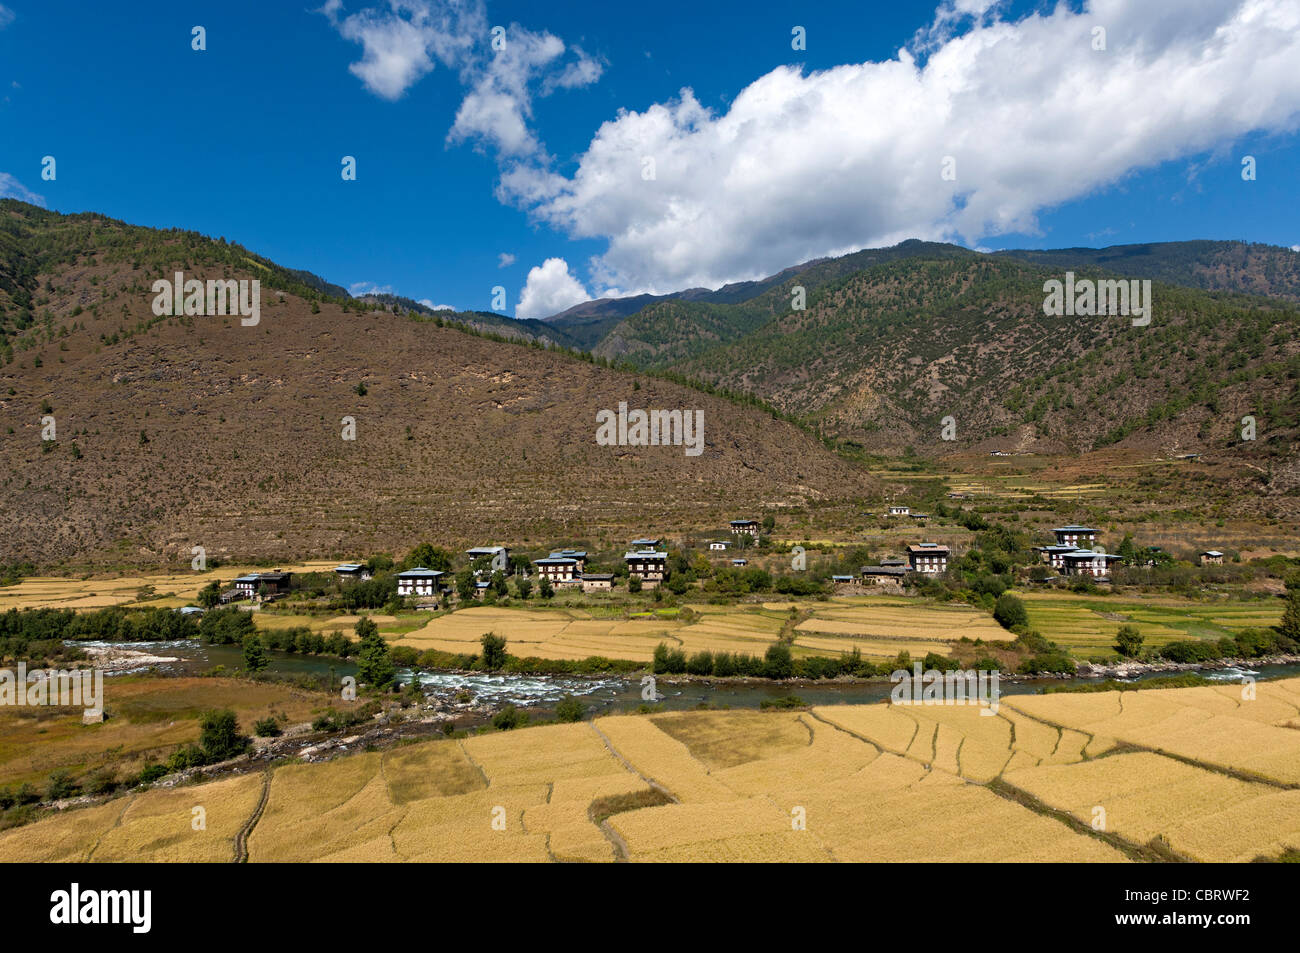 Landscape with paddy rice fields in the Paro valley, Bhutan Stock Photo